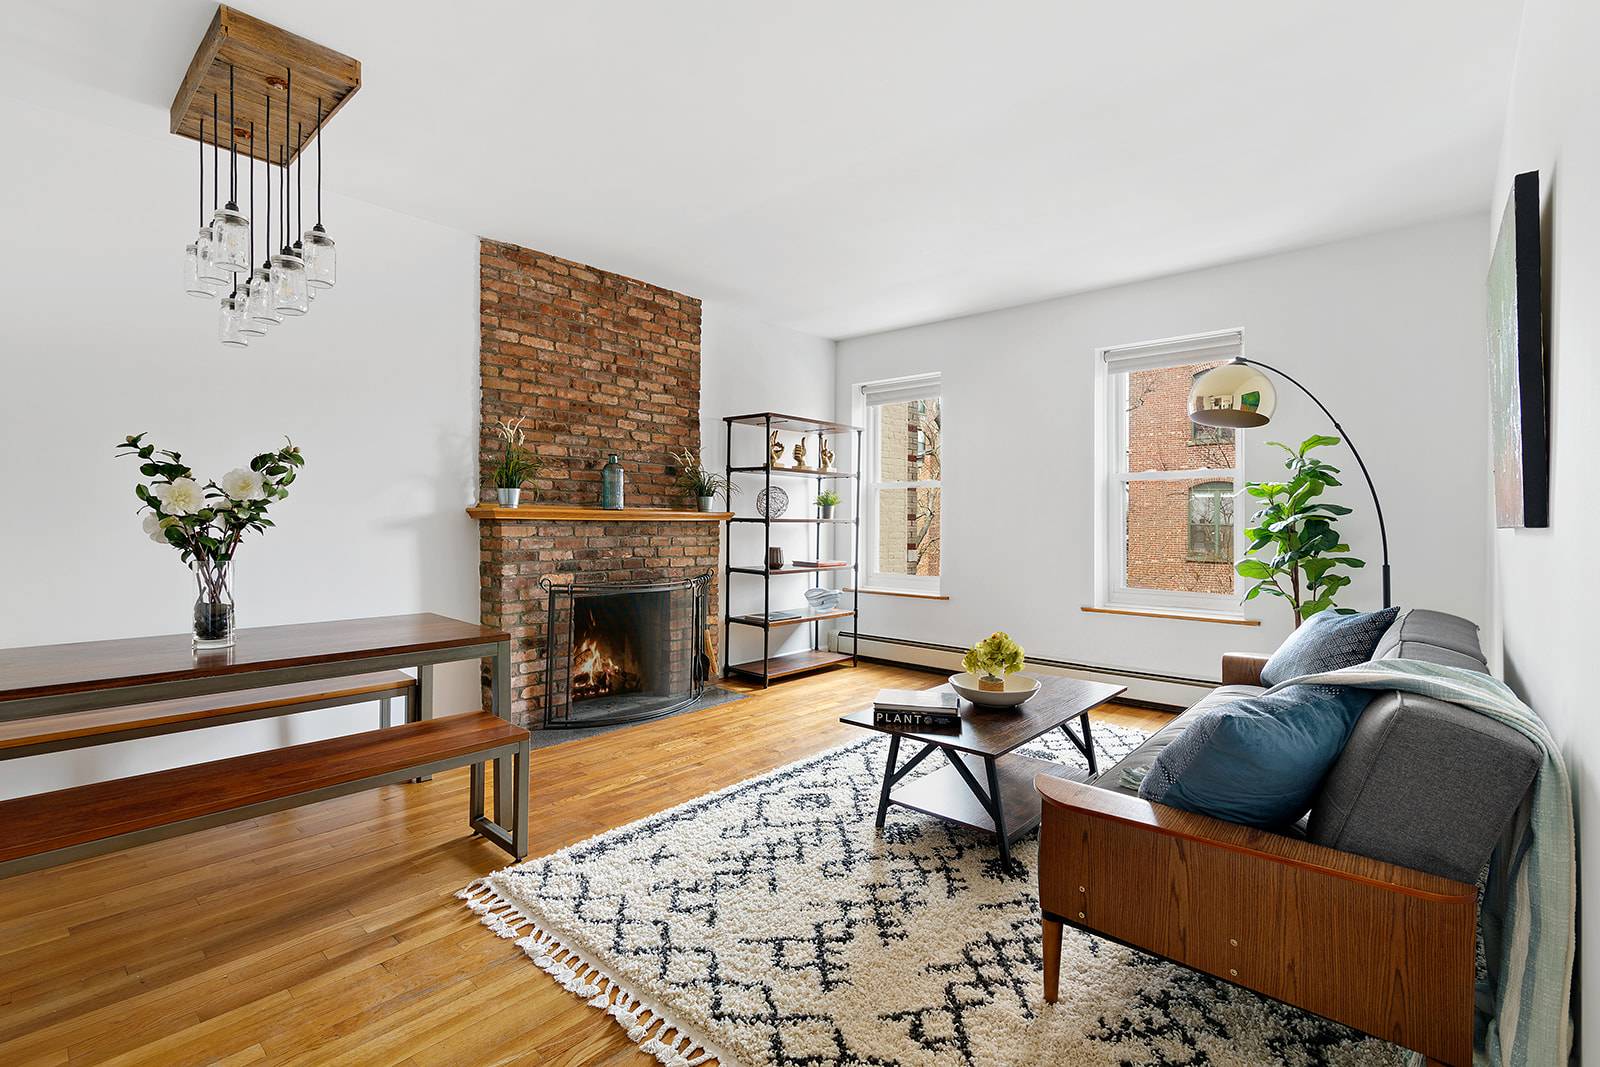 Charming 2 bed 1 bath home on a quiet tree lined landmarked street just one block from Prospect Park and close to transportation !